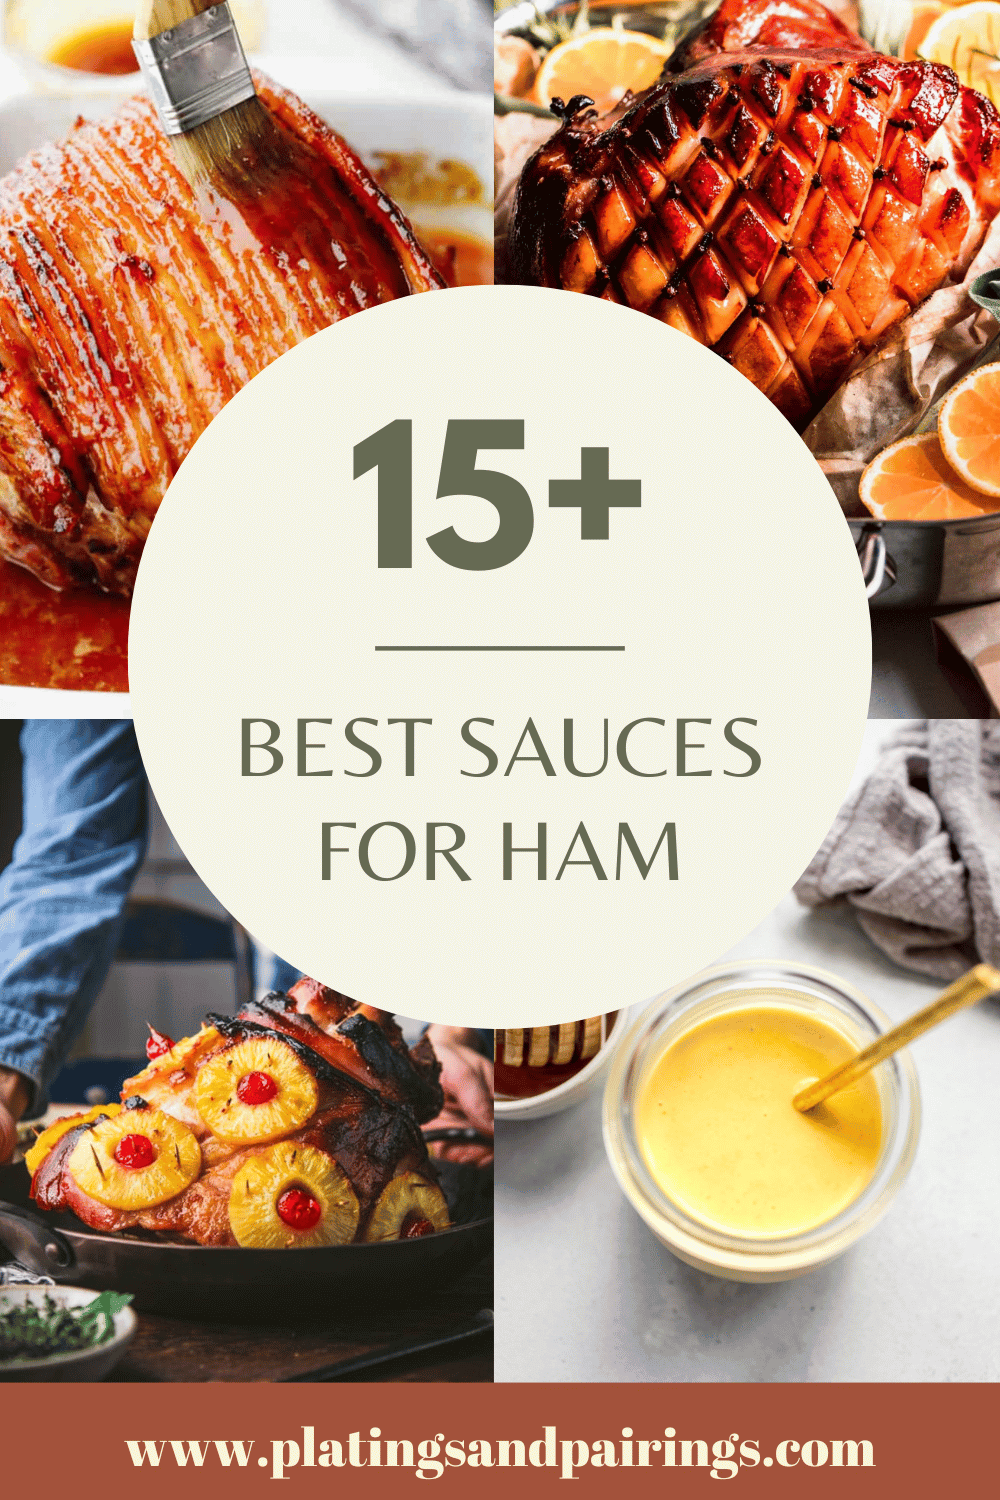 Collage of sauces for ham with text overlay.